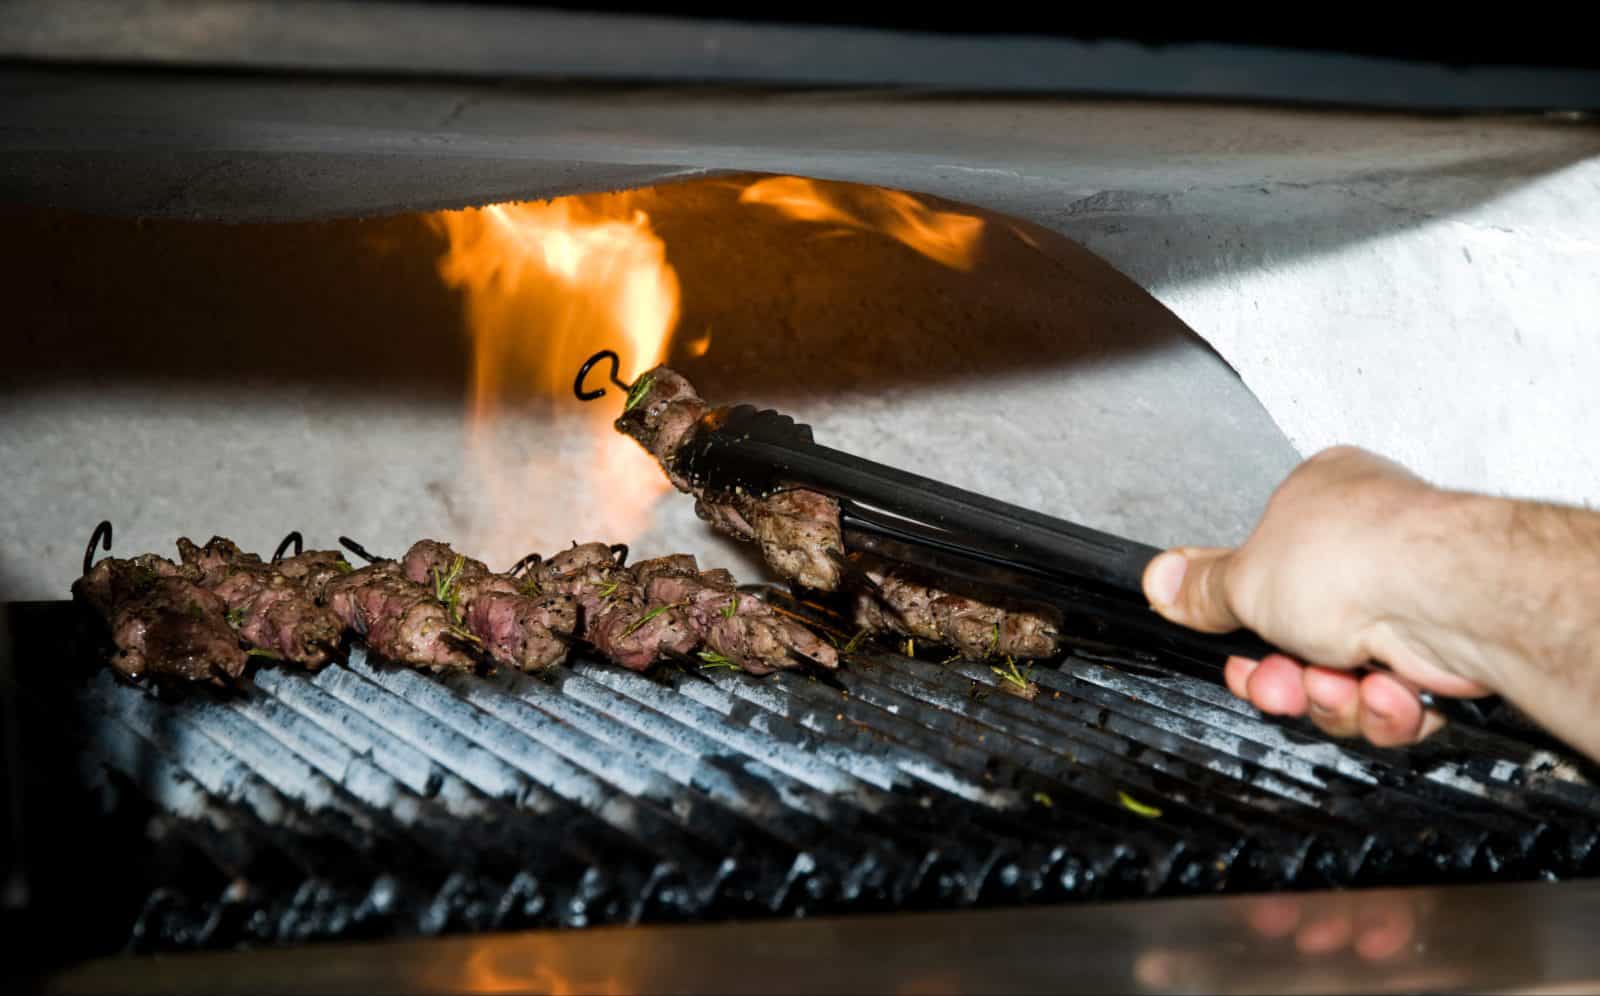 Grilling Rosemary and Garlic Lamb Skewers in the Taboon Oven